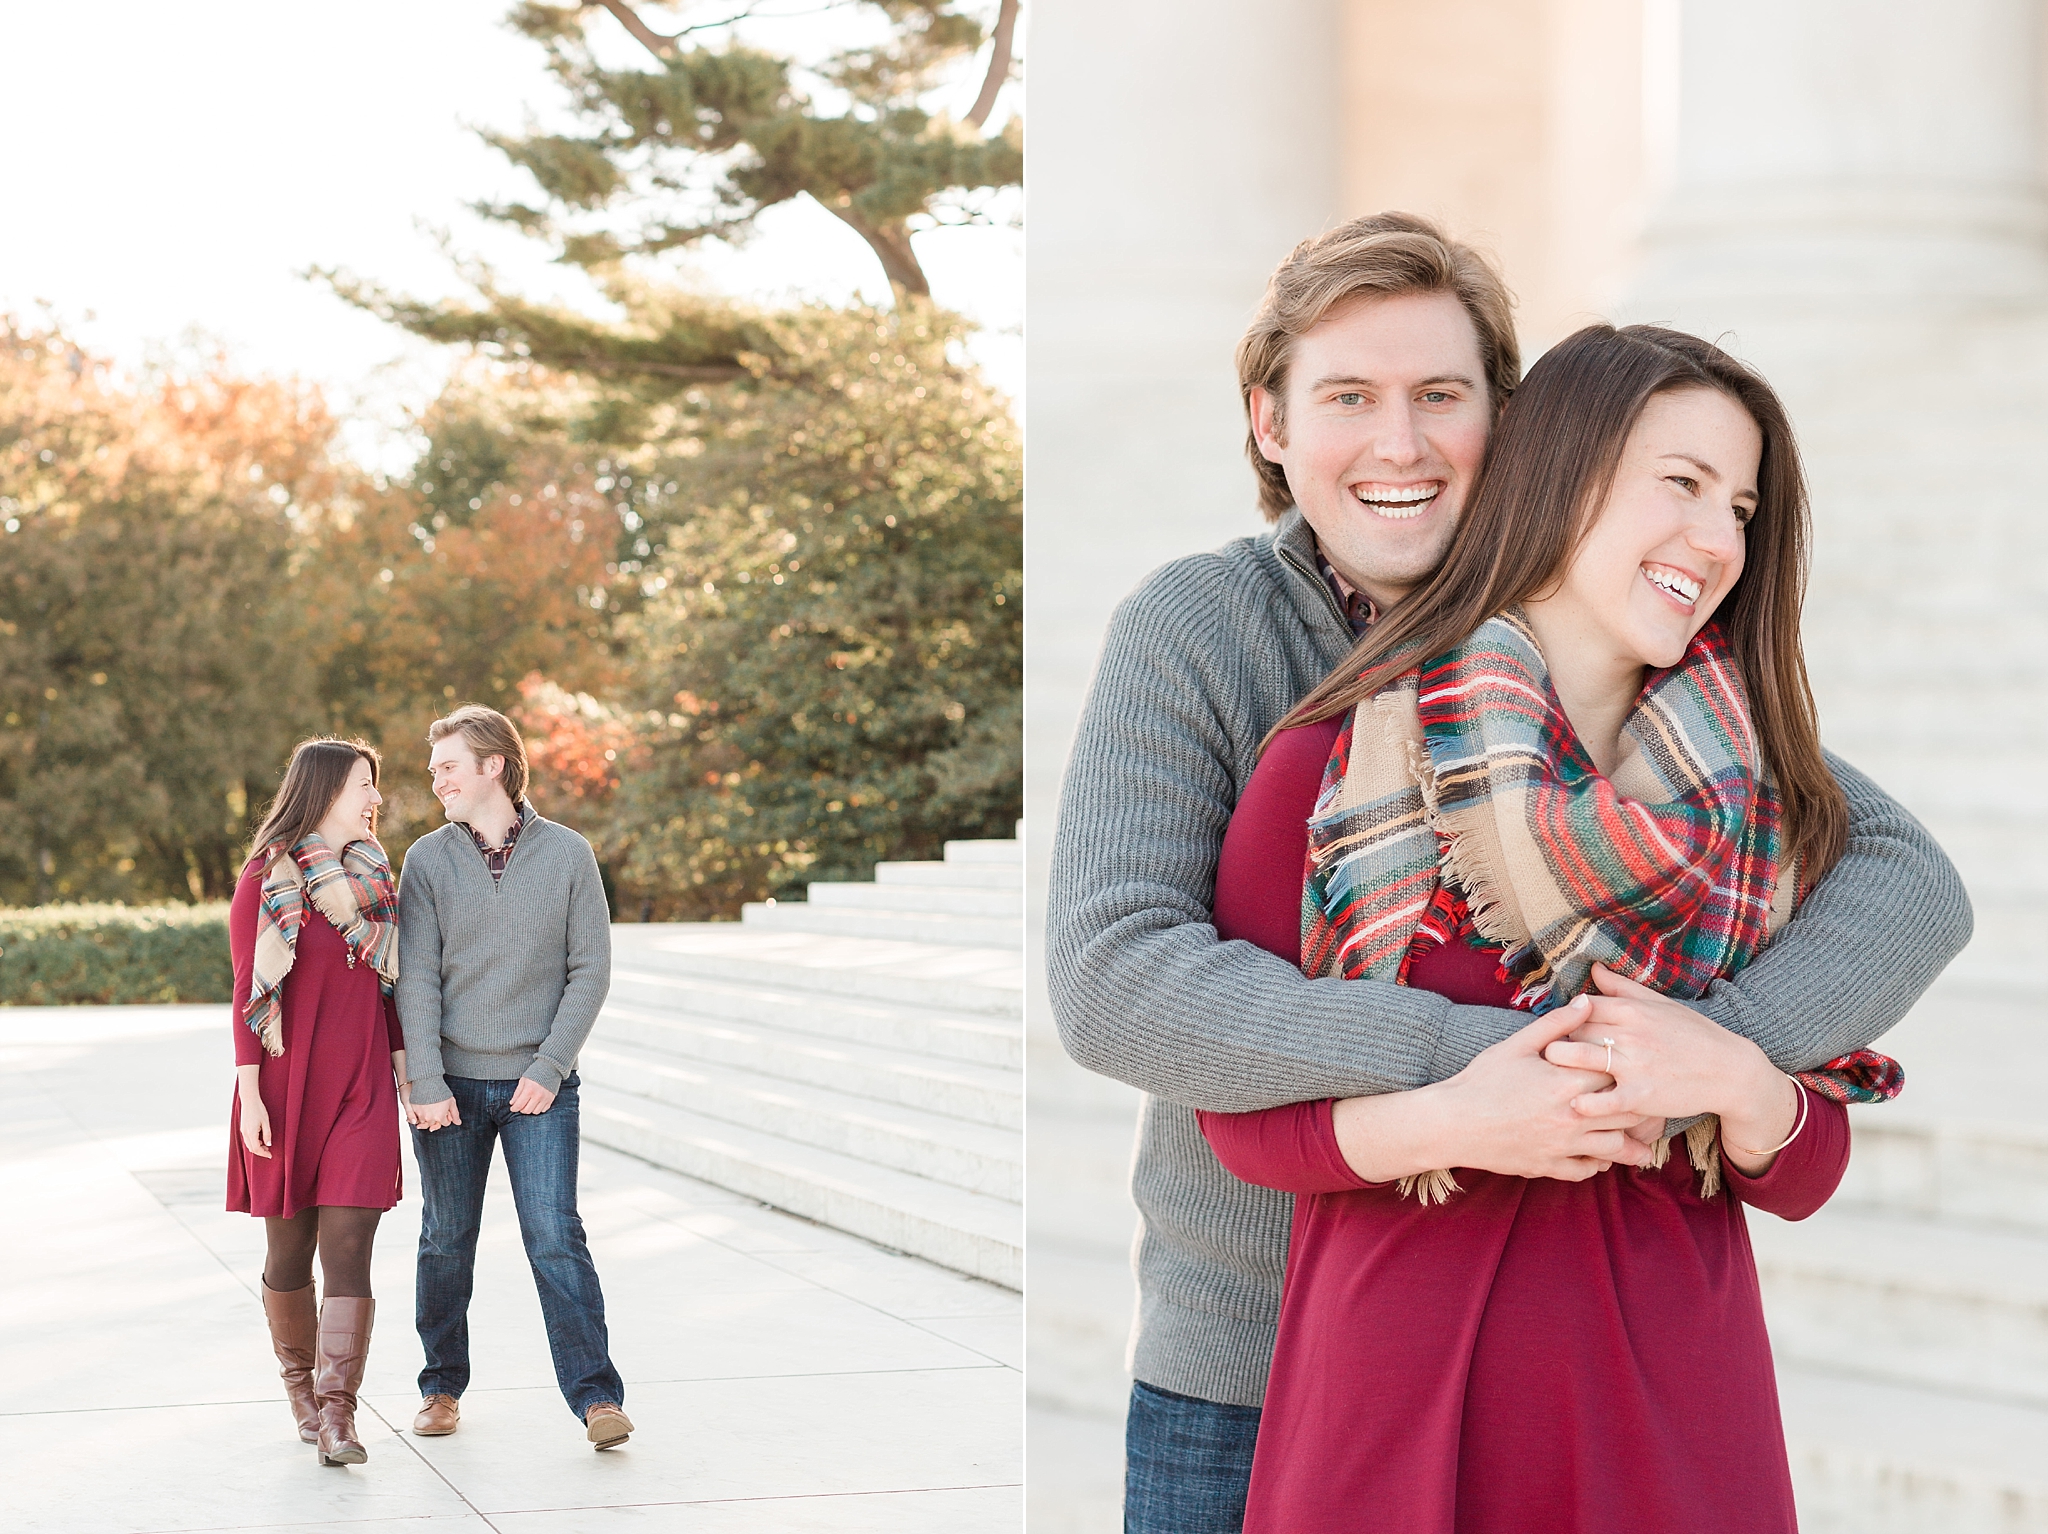 A stylish fall engagement session at the iconic Jefferson Memorial in Washington, DC.